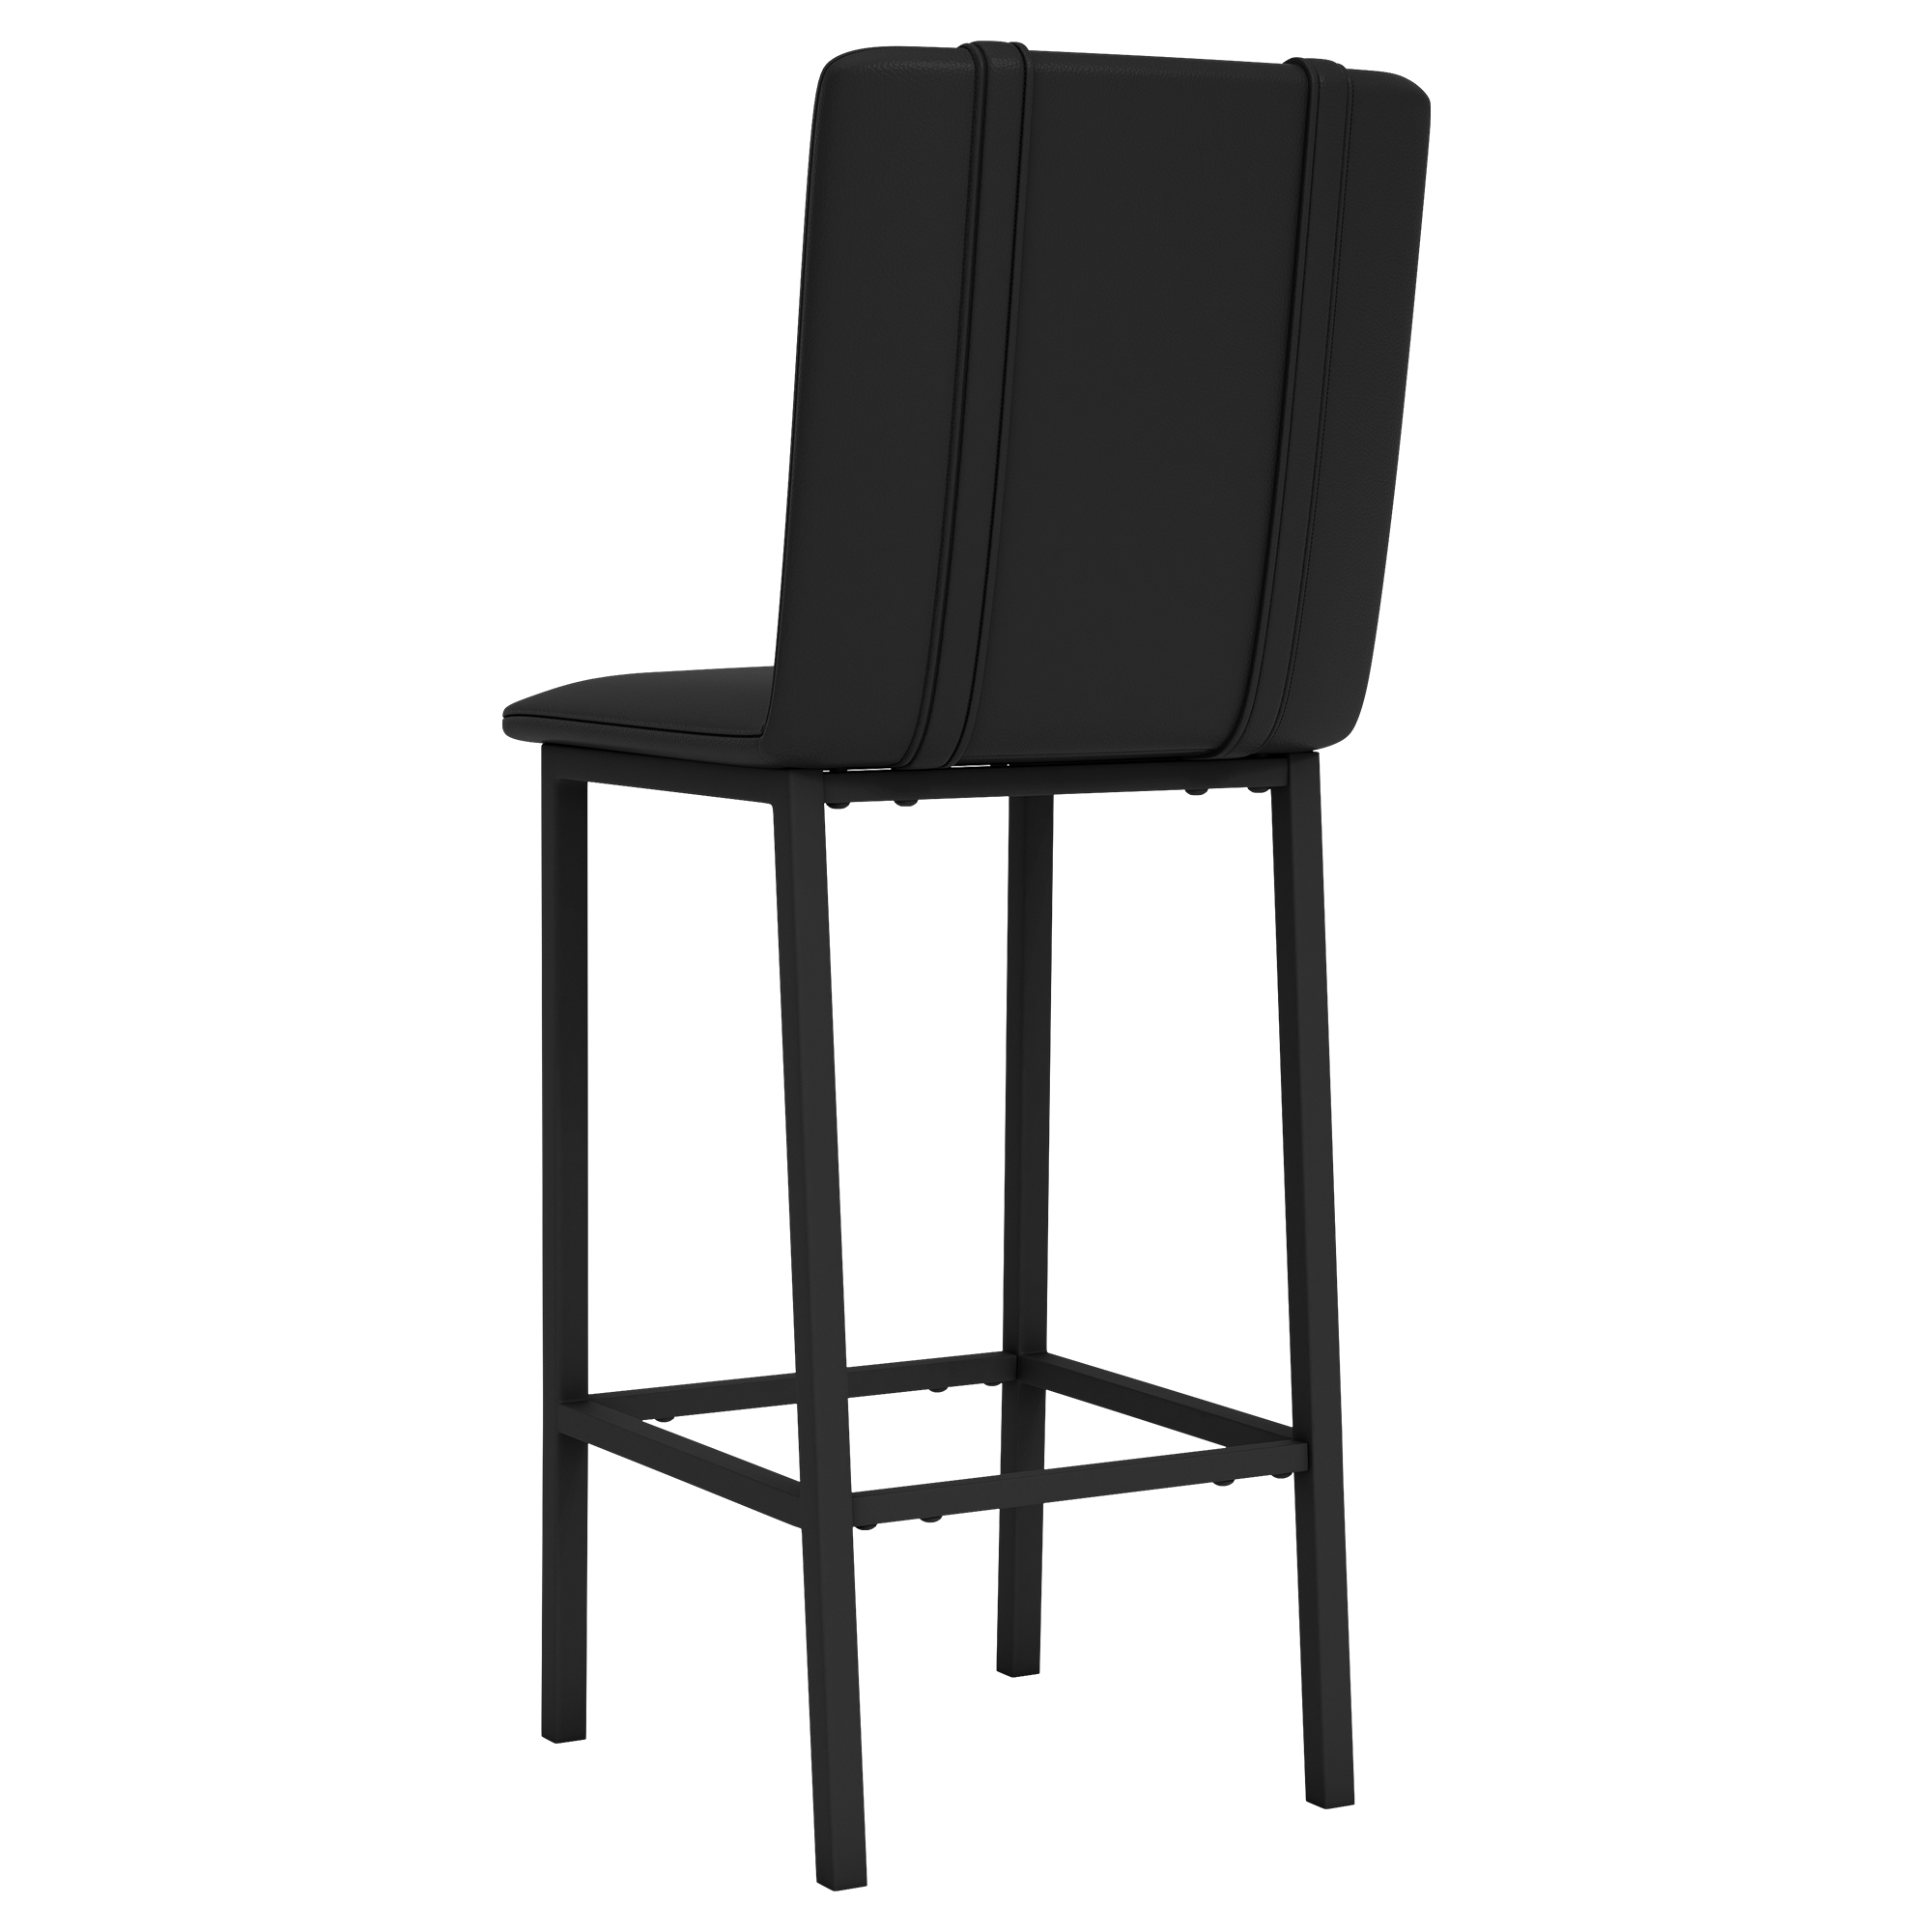 Bar Stool 500 with Milwaukee Braves Cooperstown Secondary Set of 2